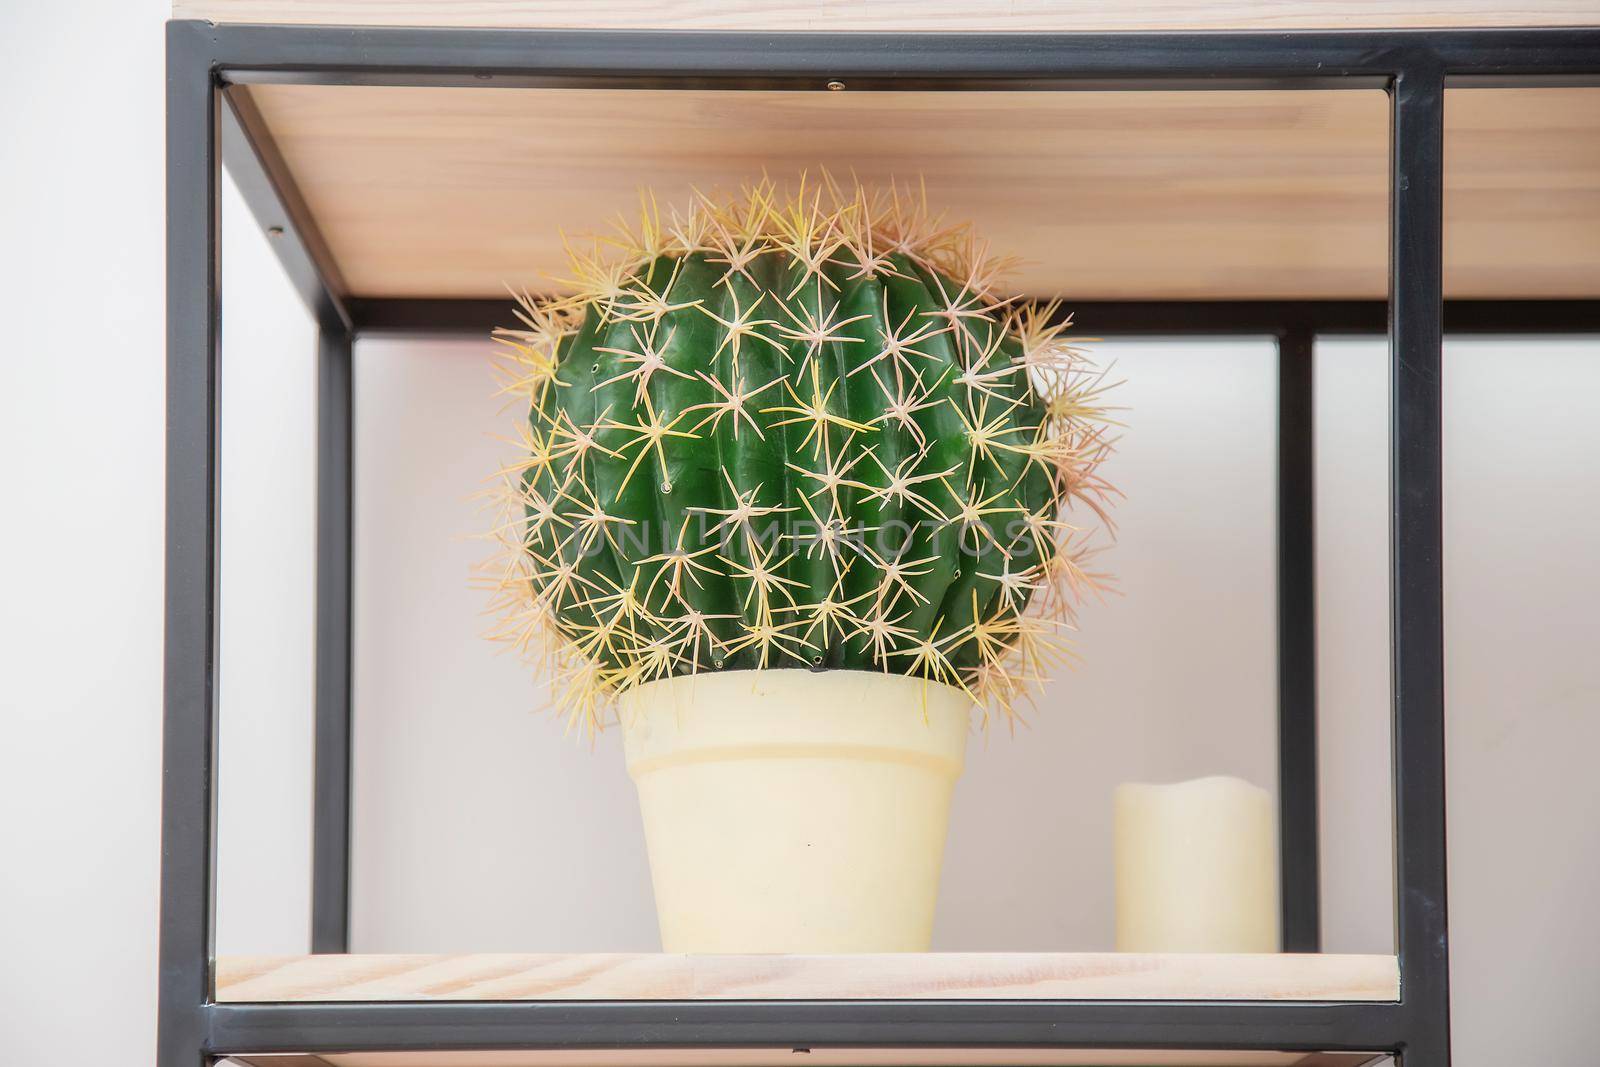 A huge cactus flower in a pot on a metal rack in the style of minimalism by galinasharapova